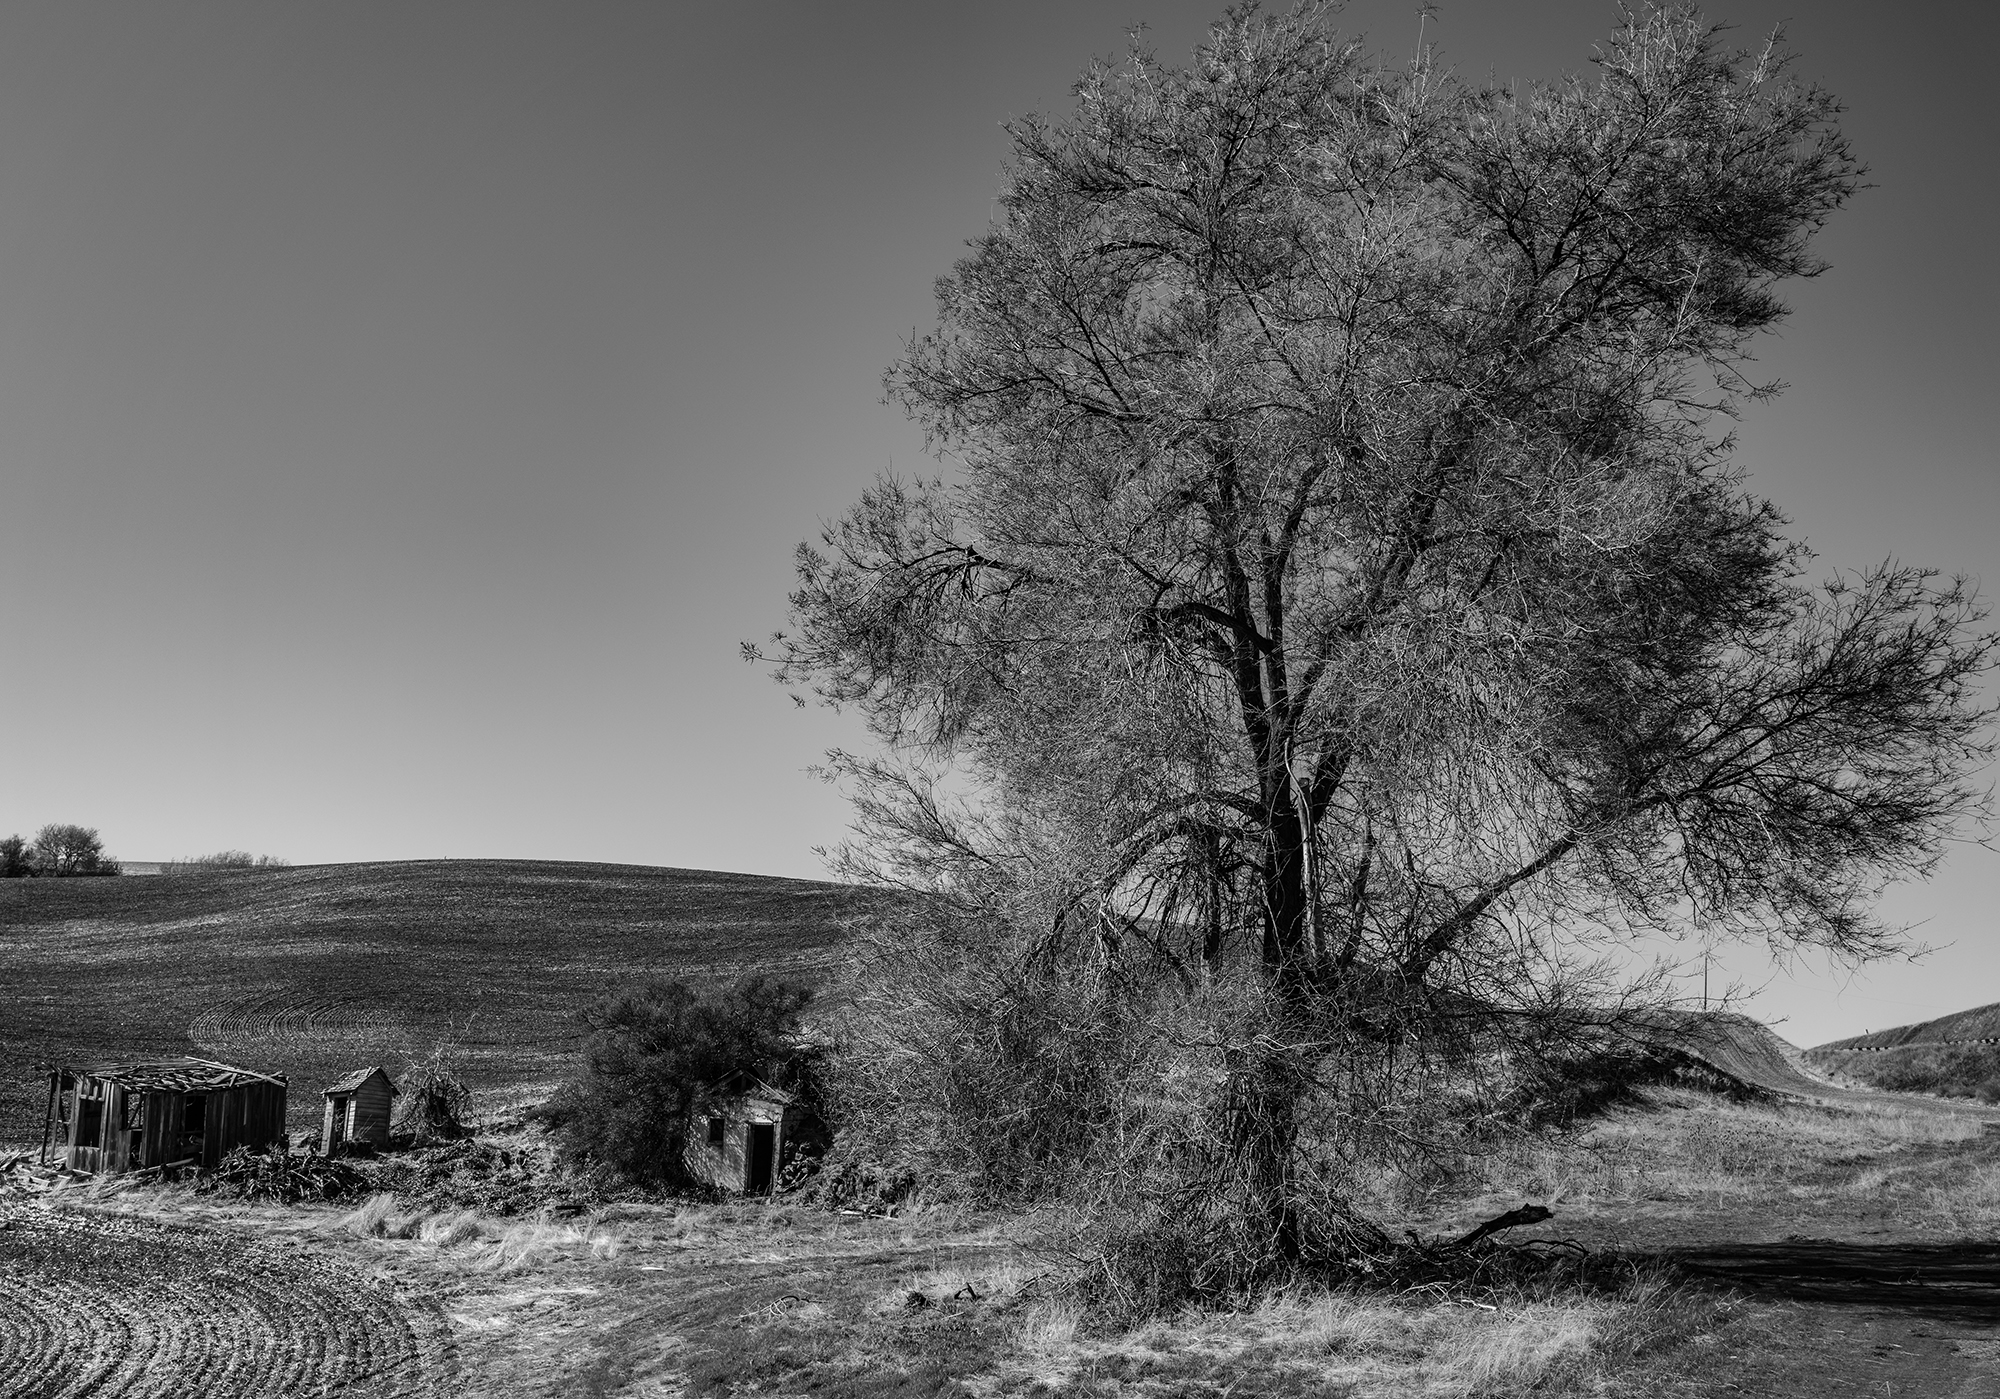 Remnants of an old homestead speak to a hardscrabble lifestyle in years past.